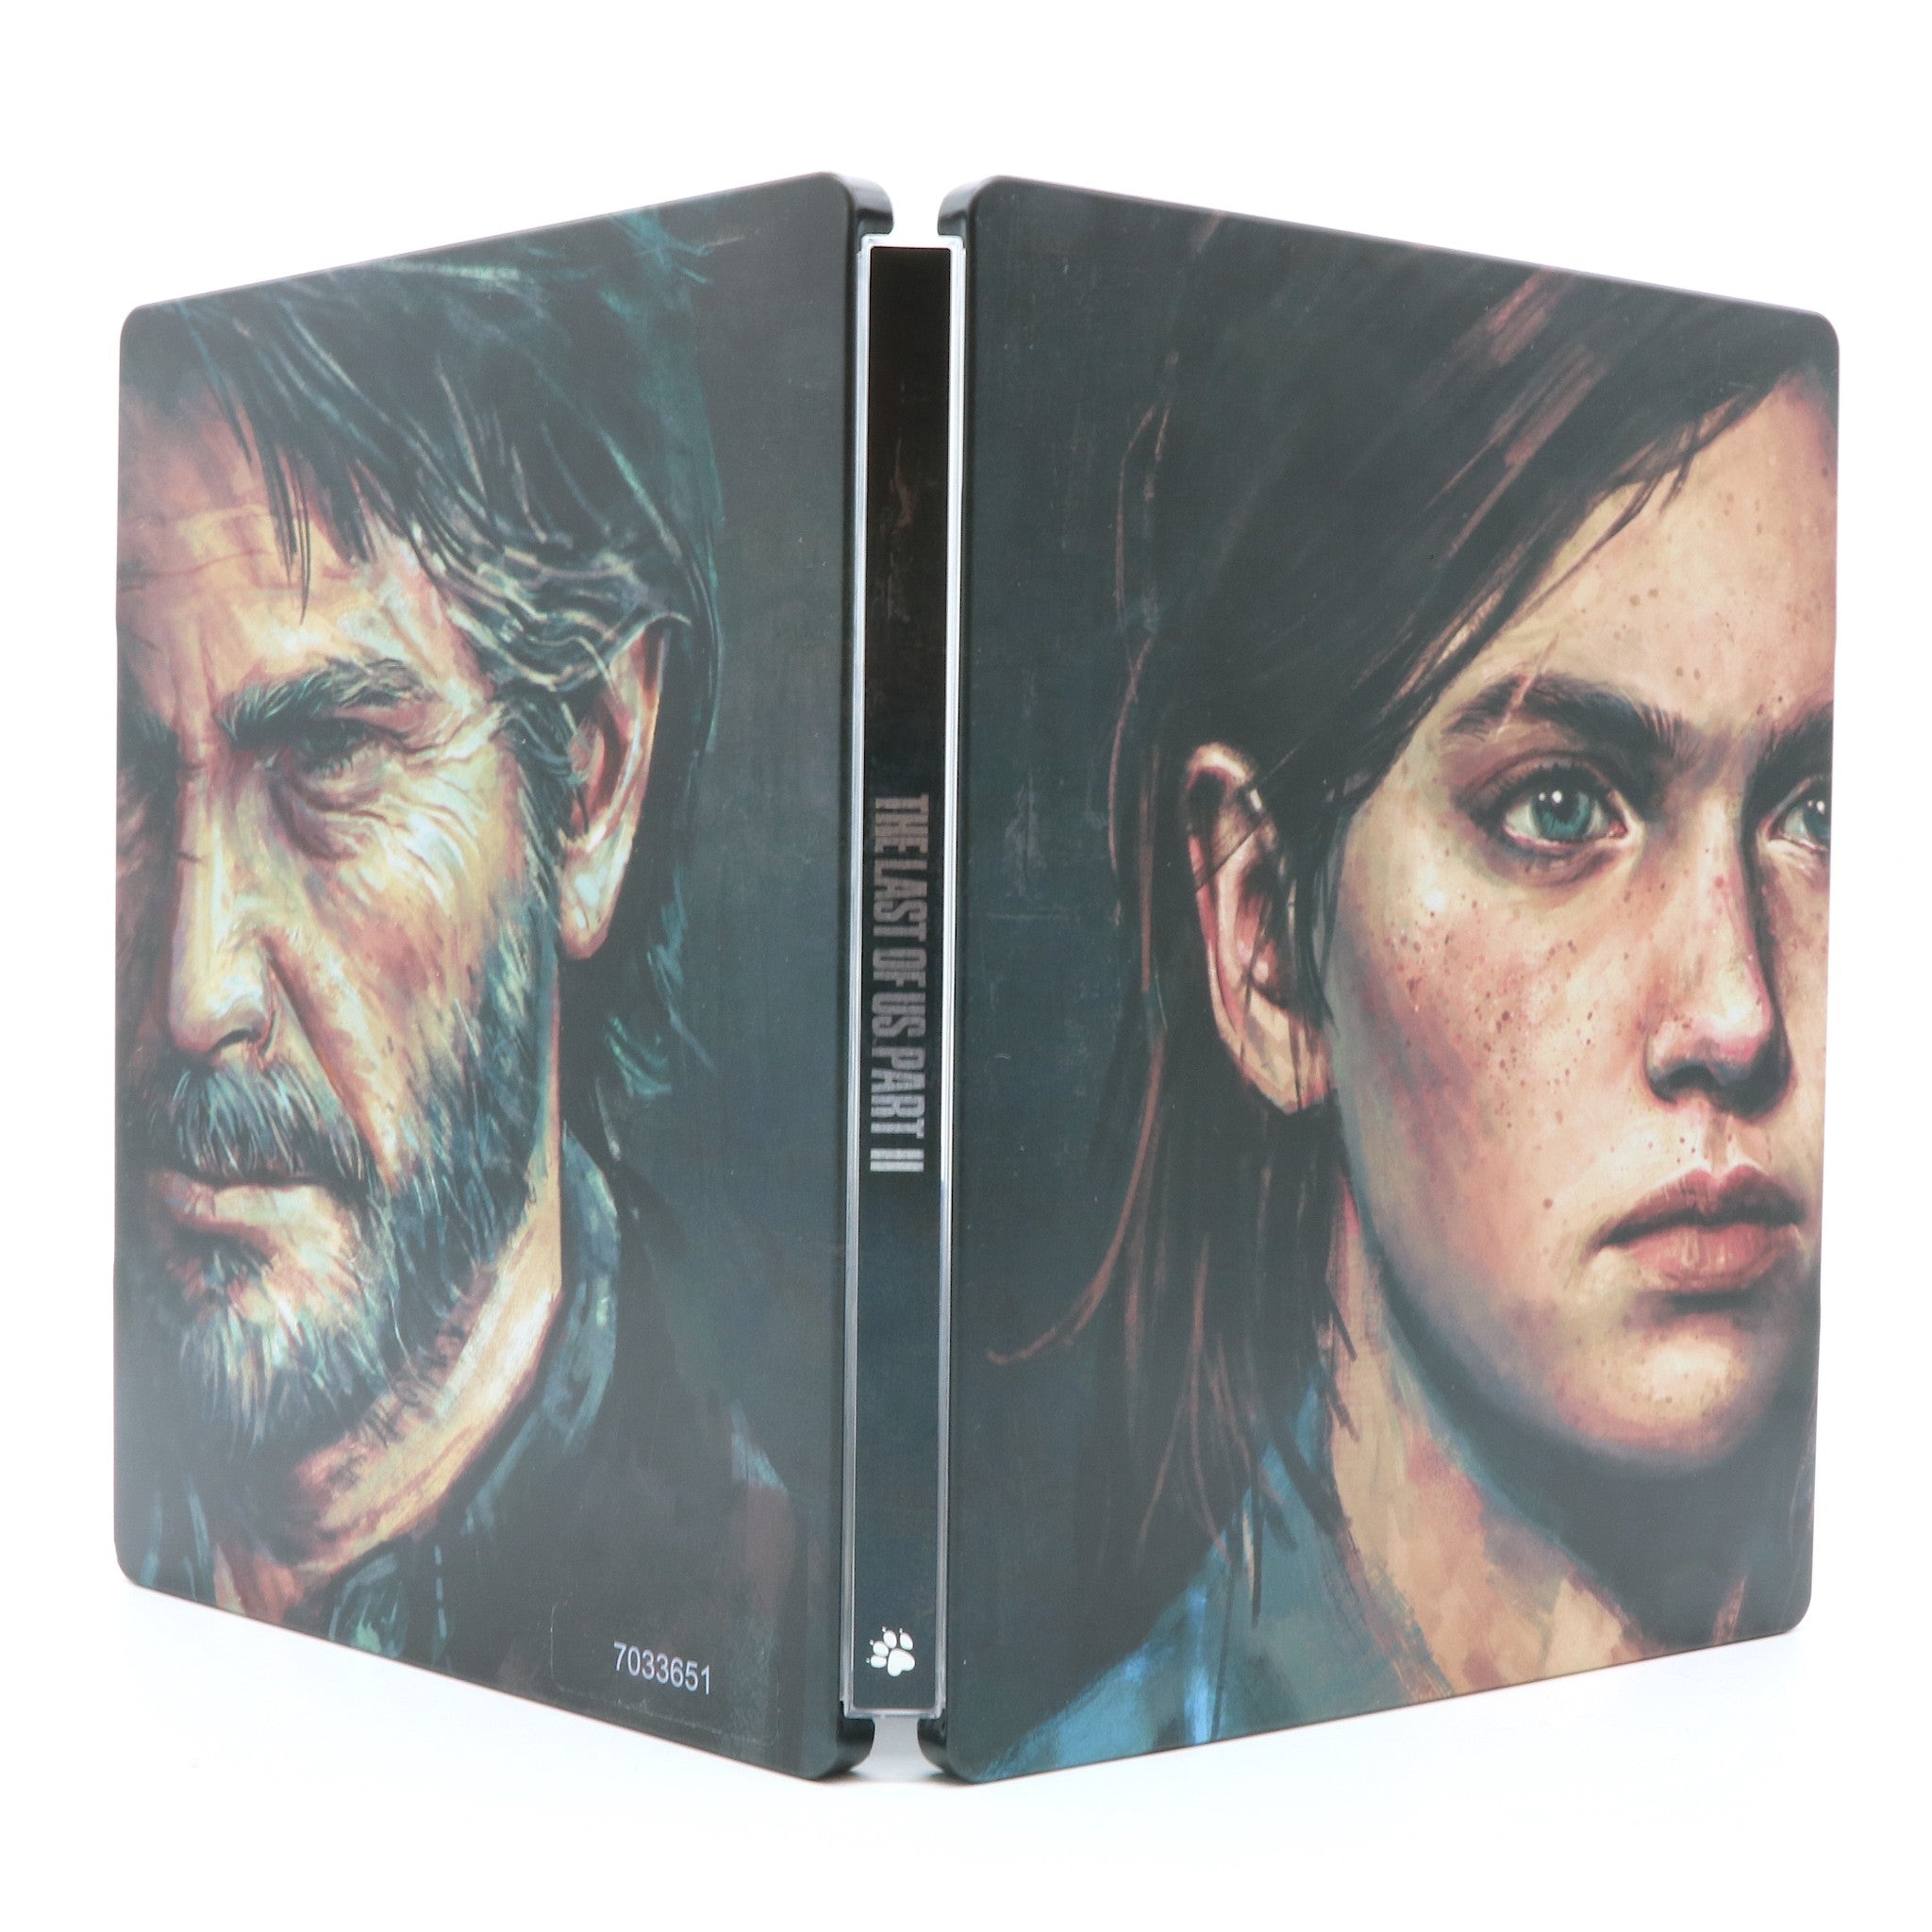 The Last Of Us Part II | SteelBook Tin Case For PS4 Game | Collectable Condition